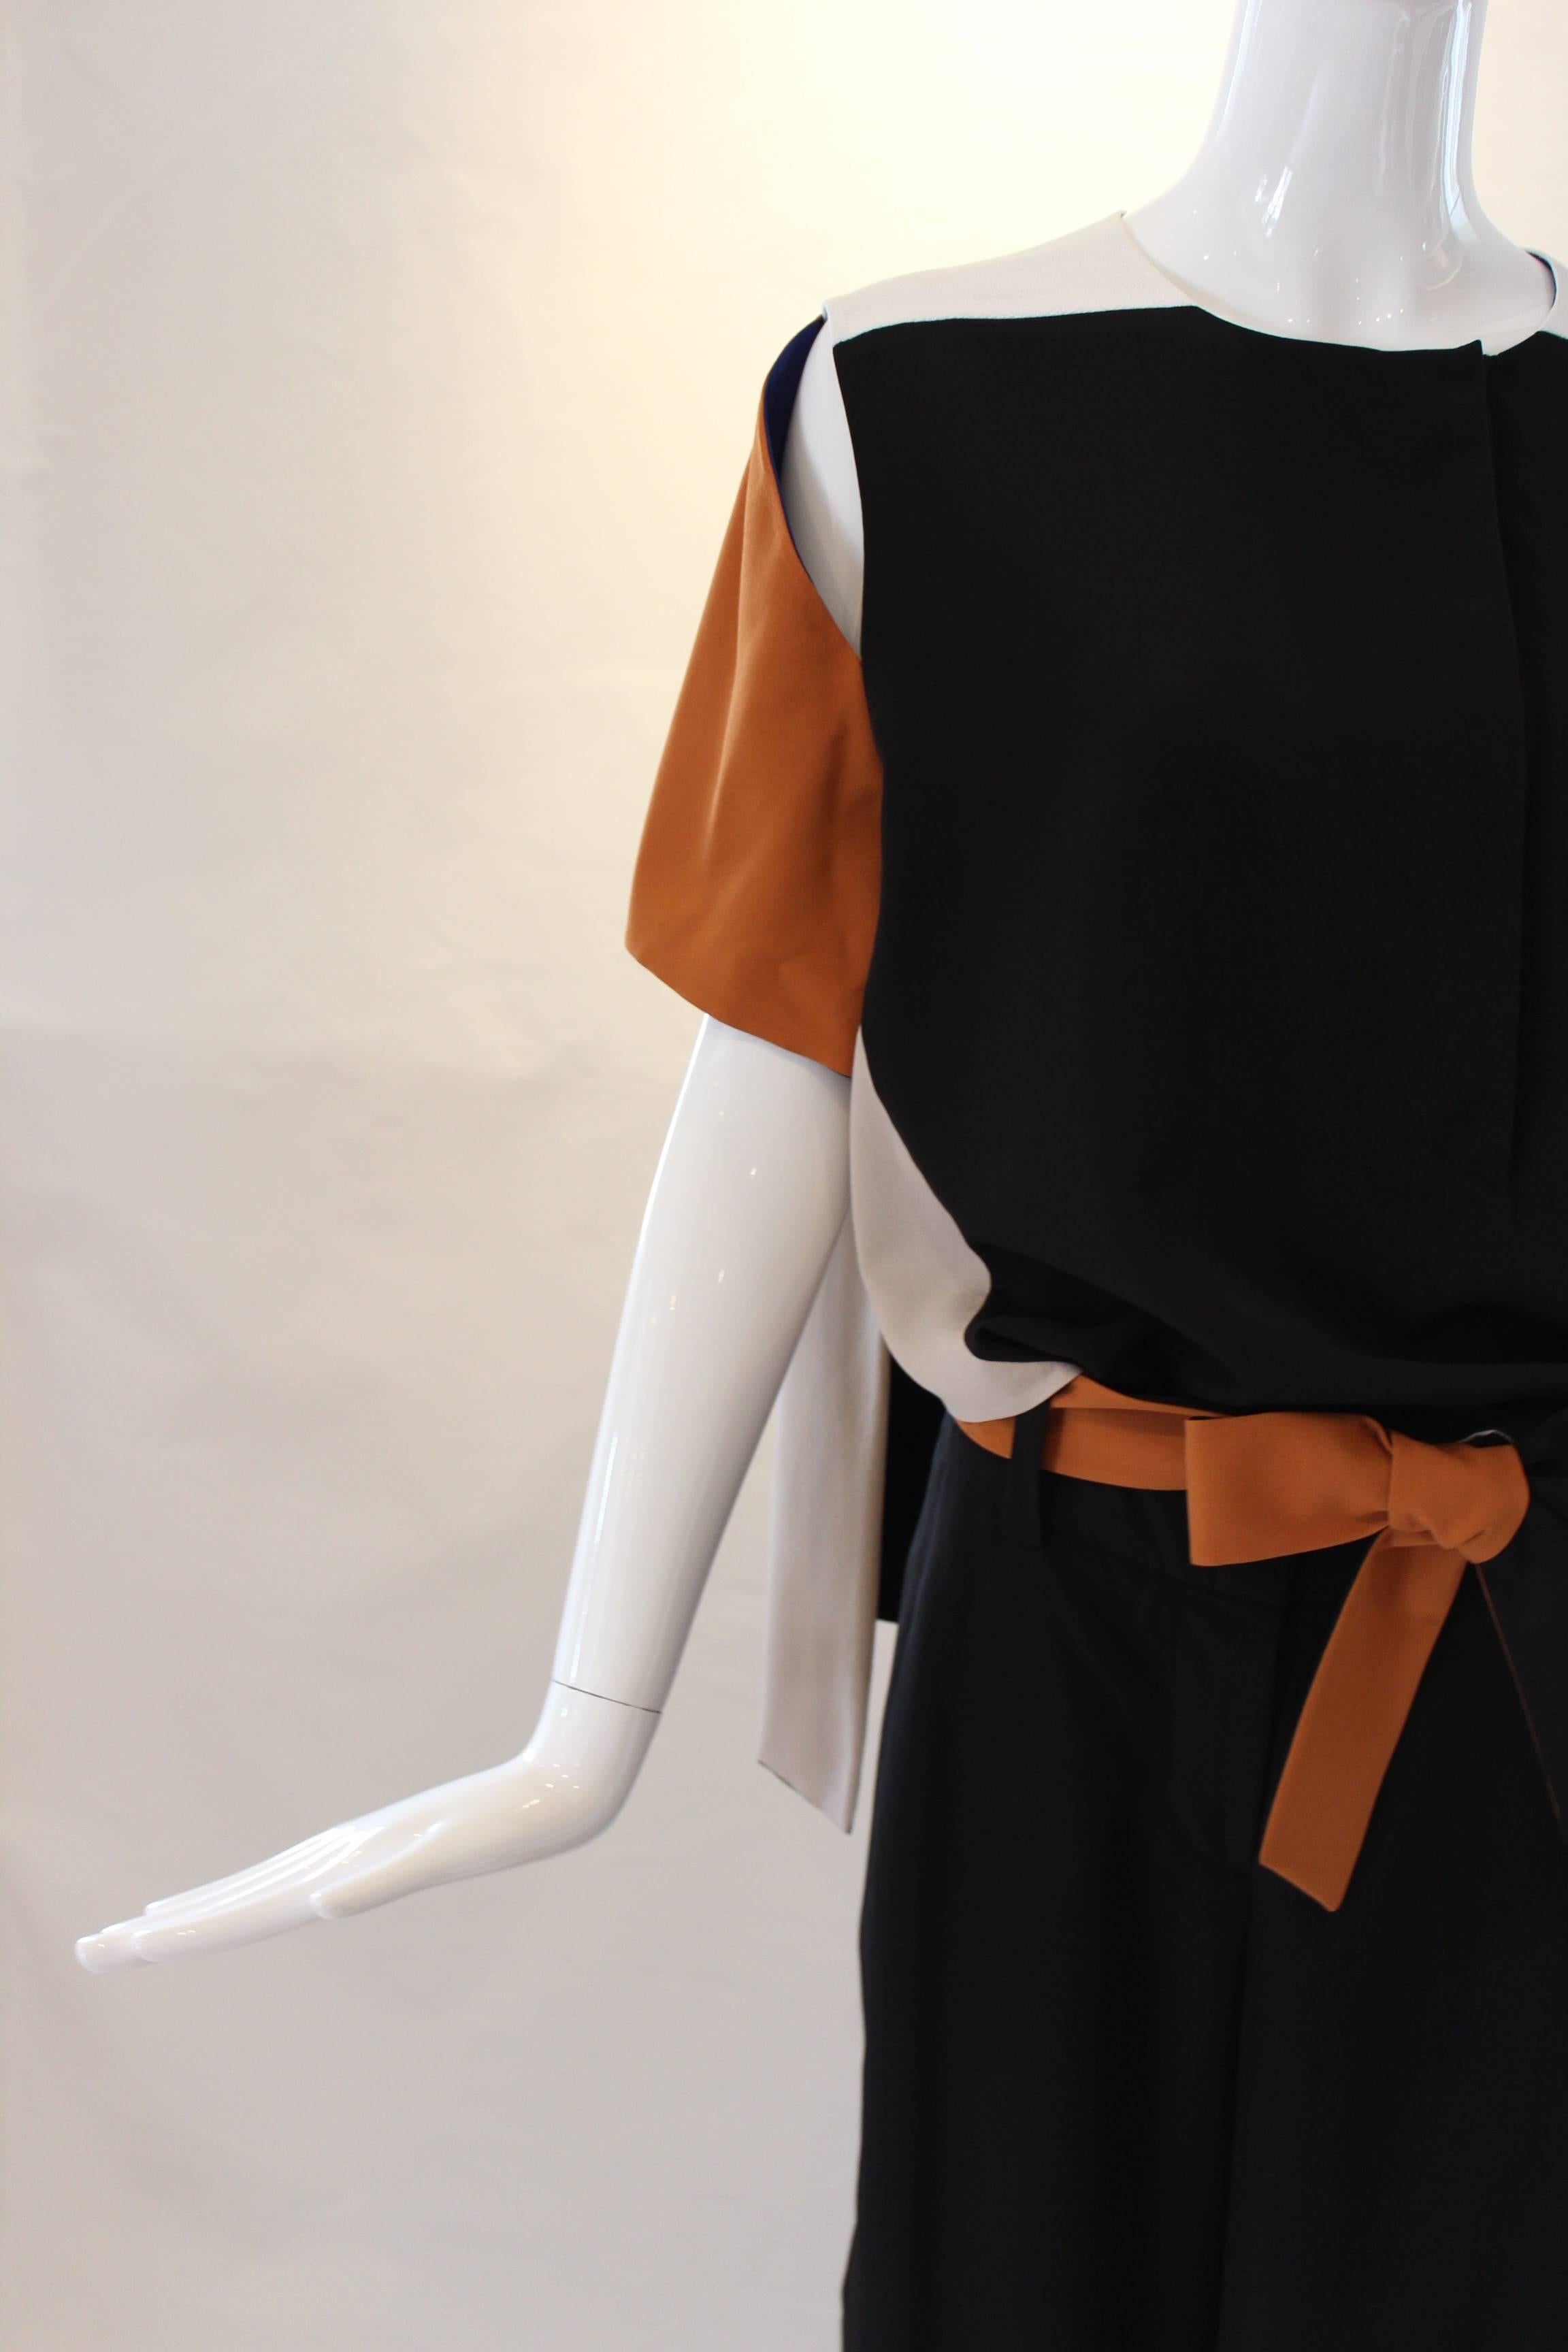 This beautifully tailored 1980s Thierry Muglar Pant Suit boasts high waisted black wide-leg trousers with a contrasting burnt orange belt. The matching color blocked top has tasteful cutouts at the shoulder with a cape-like detail at the back. A